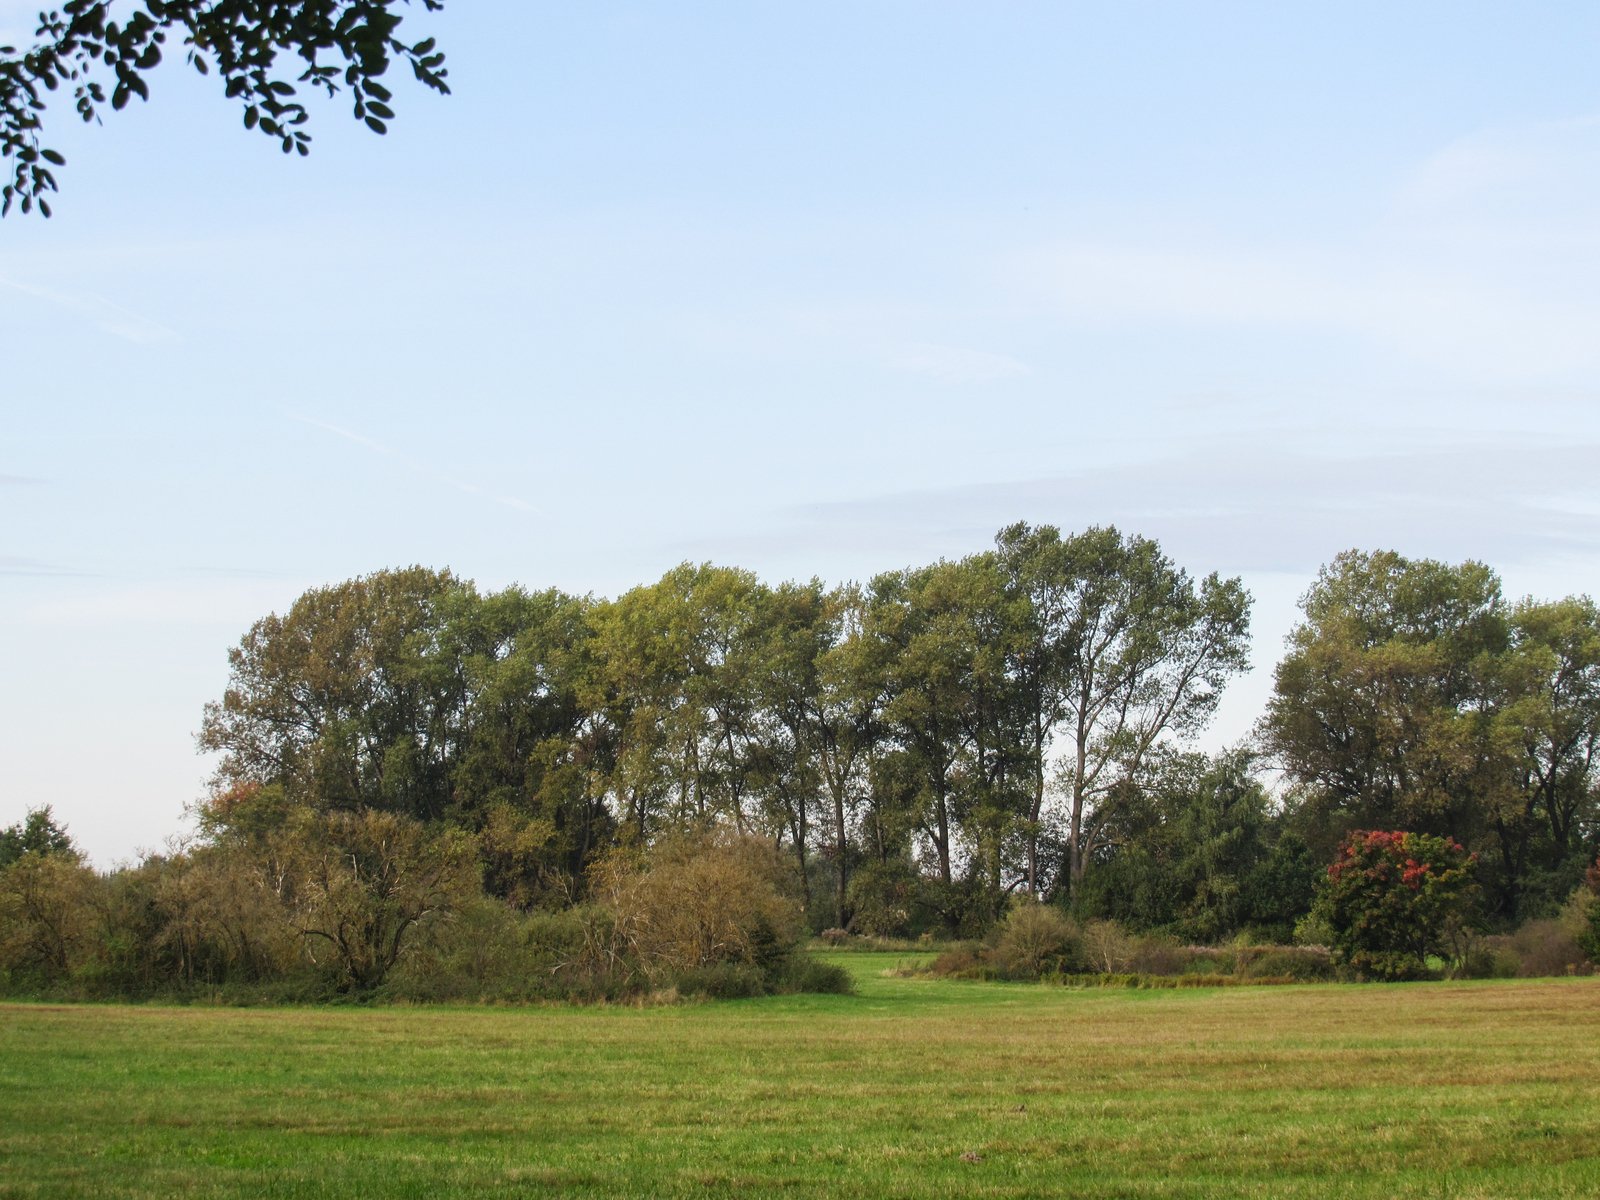 an open grassy field next to a forest